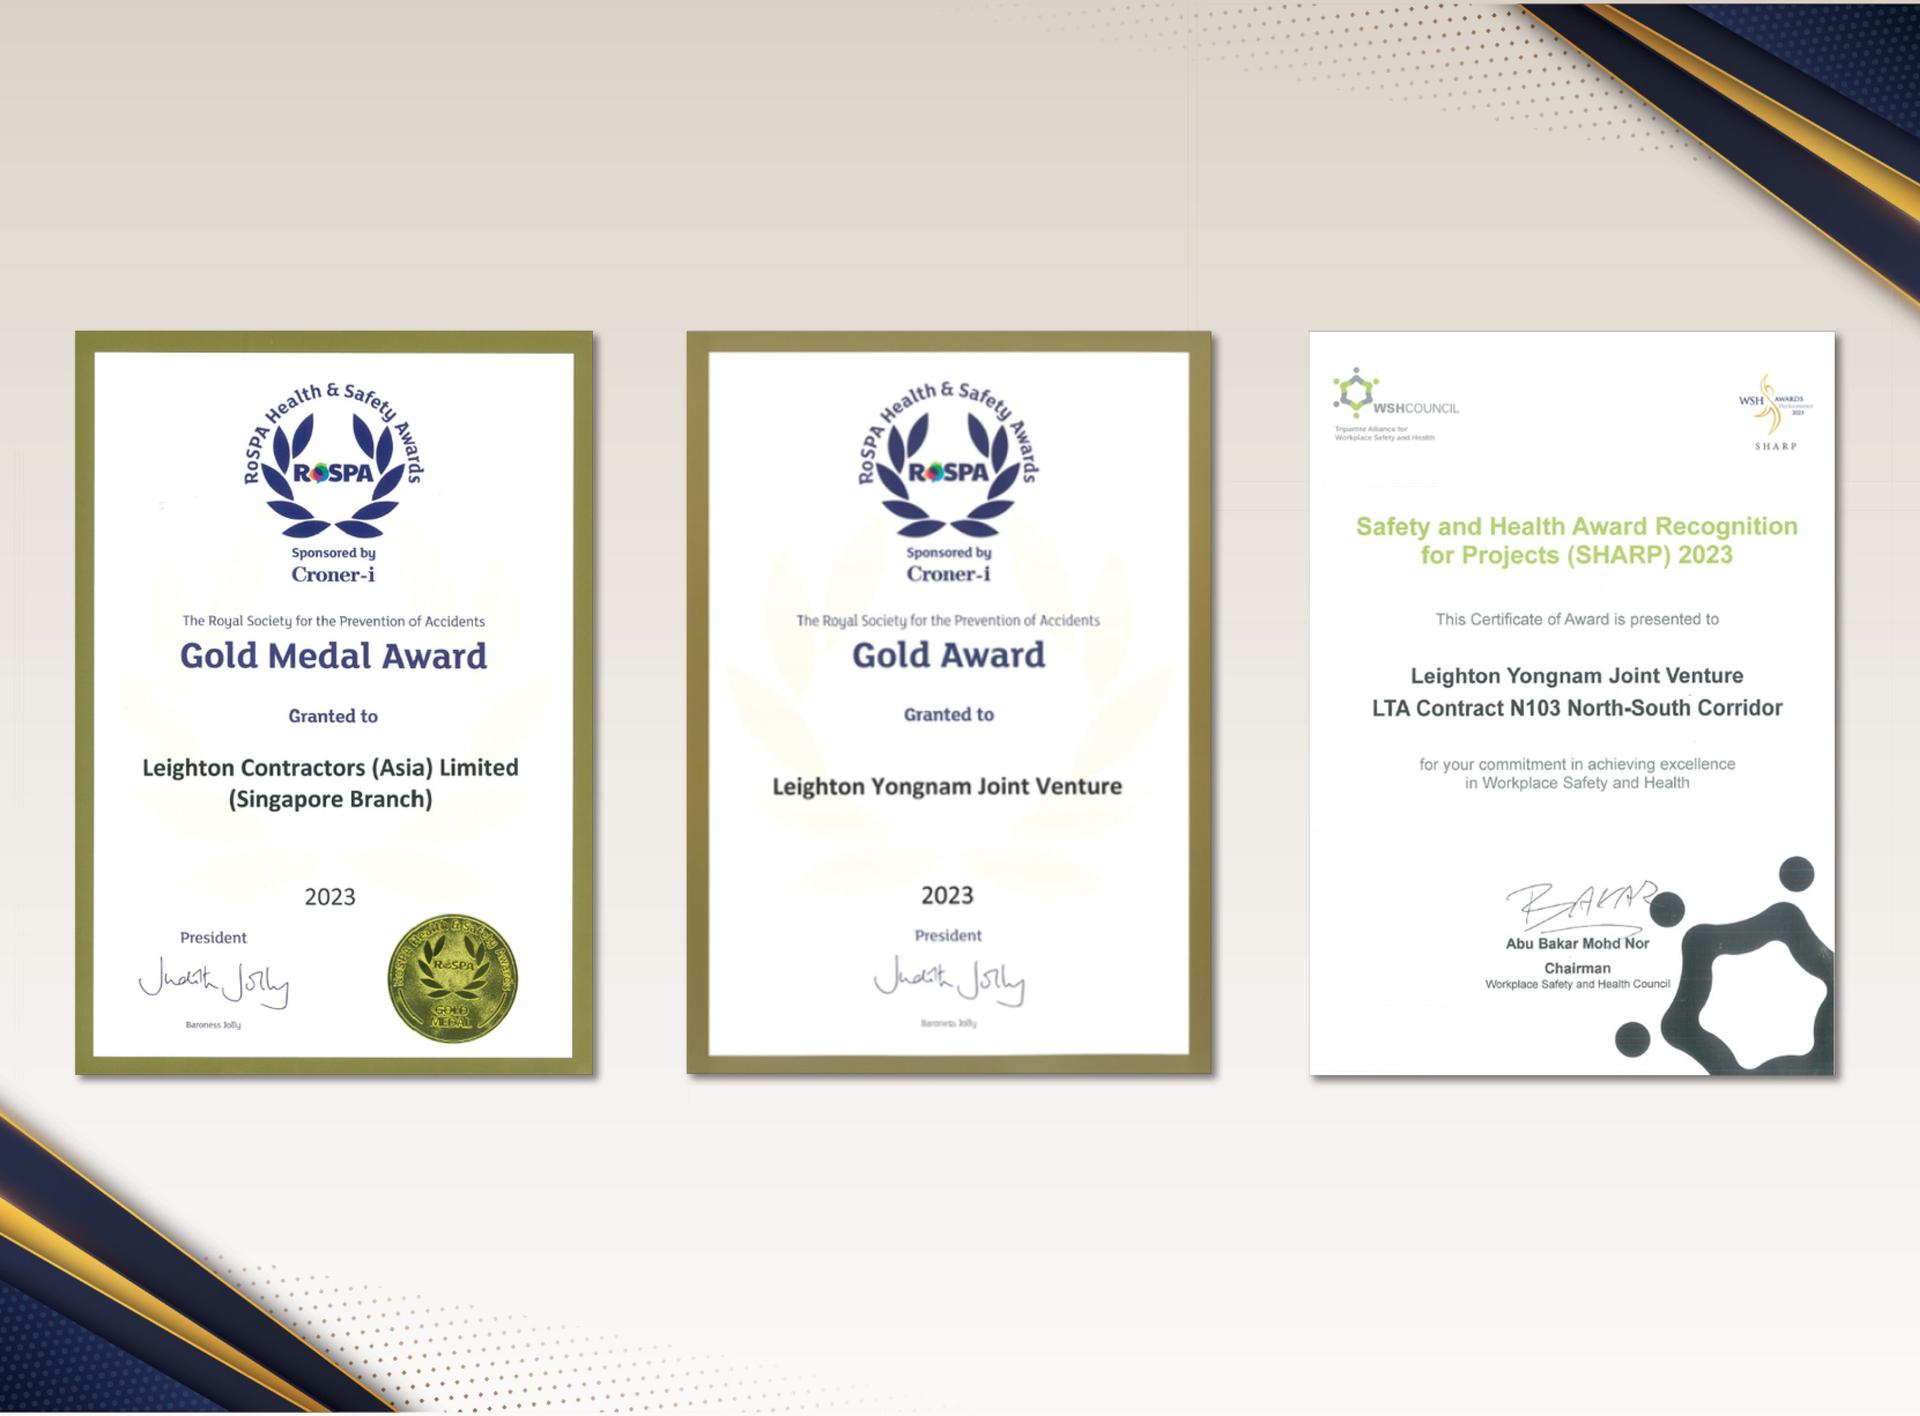 Leighton Asia continues to be recognised as a leader in health and safety practice